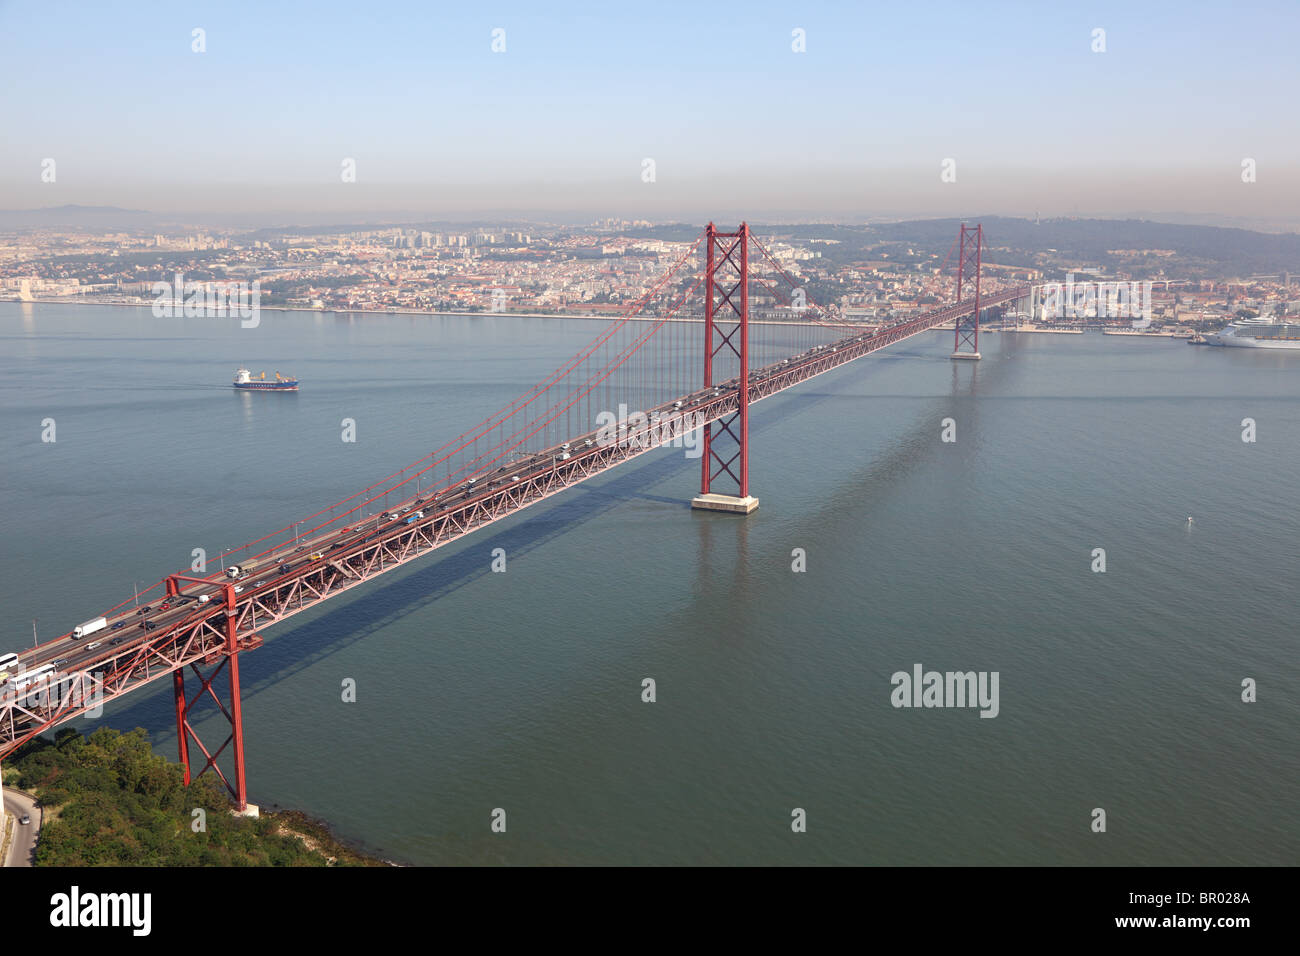 The 25 de Abril Bridge - cable-stayed bridge over the Tagus river in Lisbon, Portugal Stock Photo